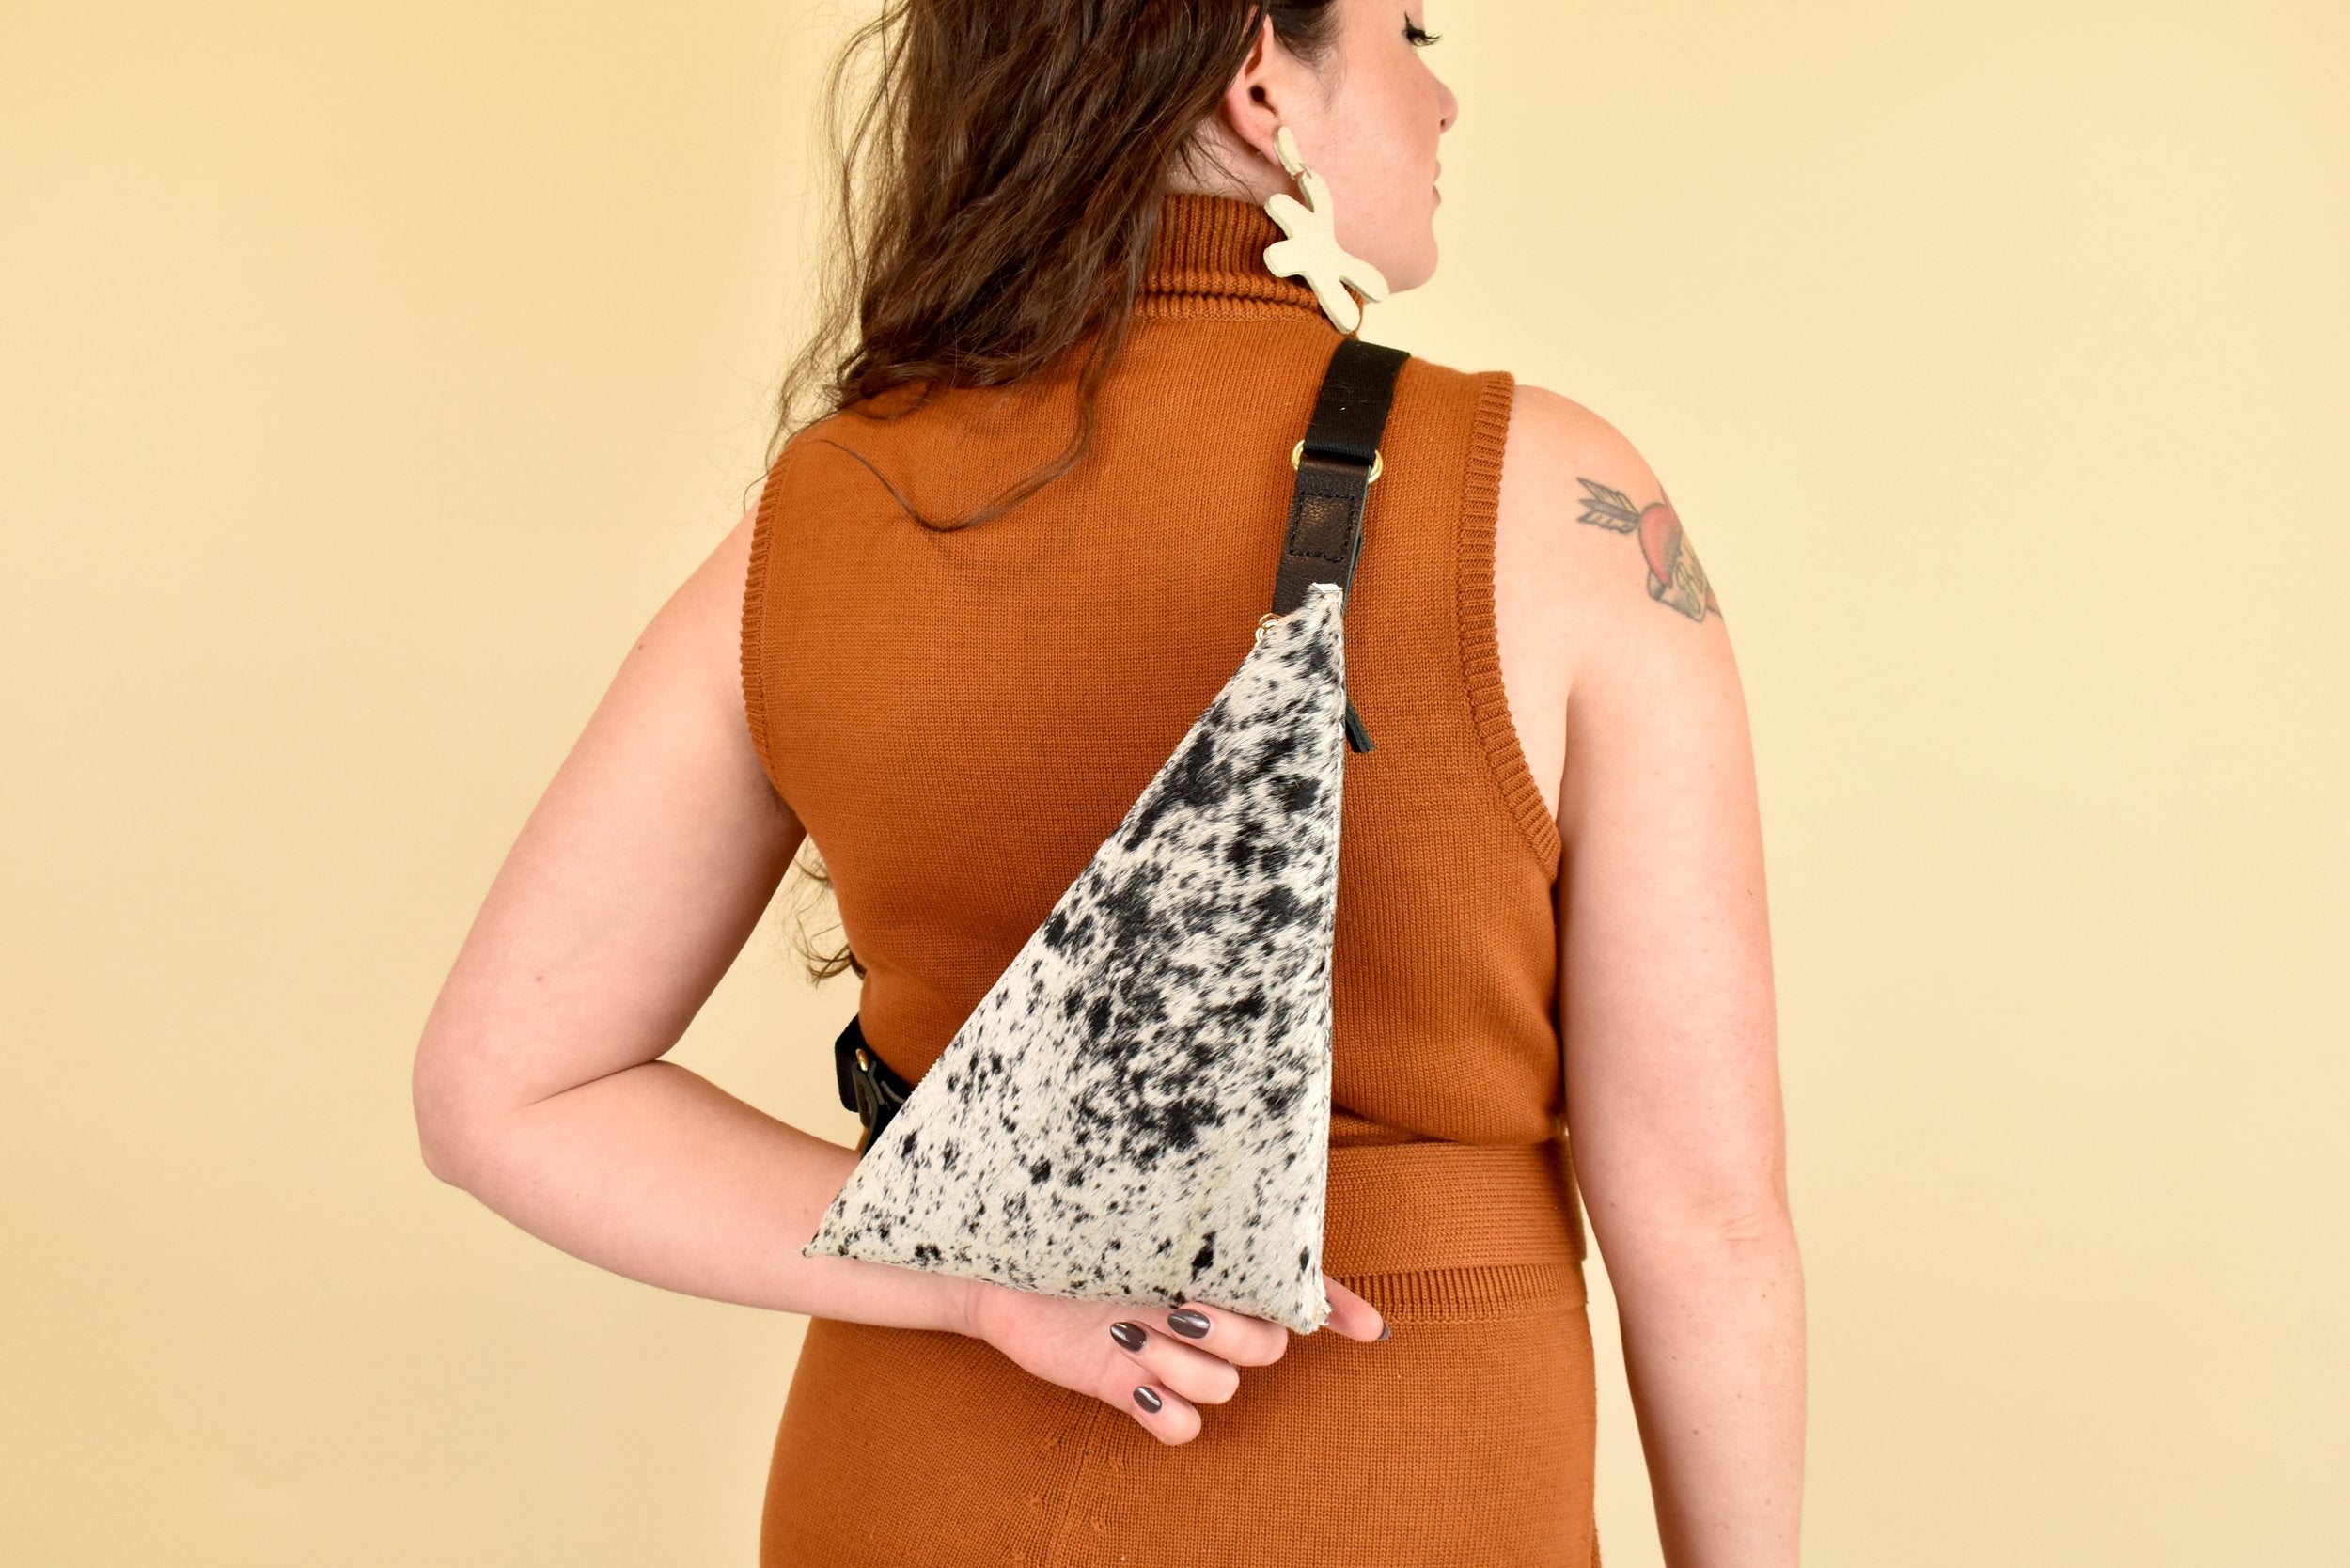 a girl wears a leather sling bag for coachella essentials bag small leather sling bag crossbody cowhide leather purse cowprint gift for bride sling bag with inside pocket on her back